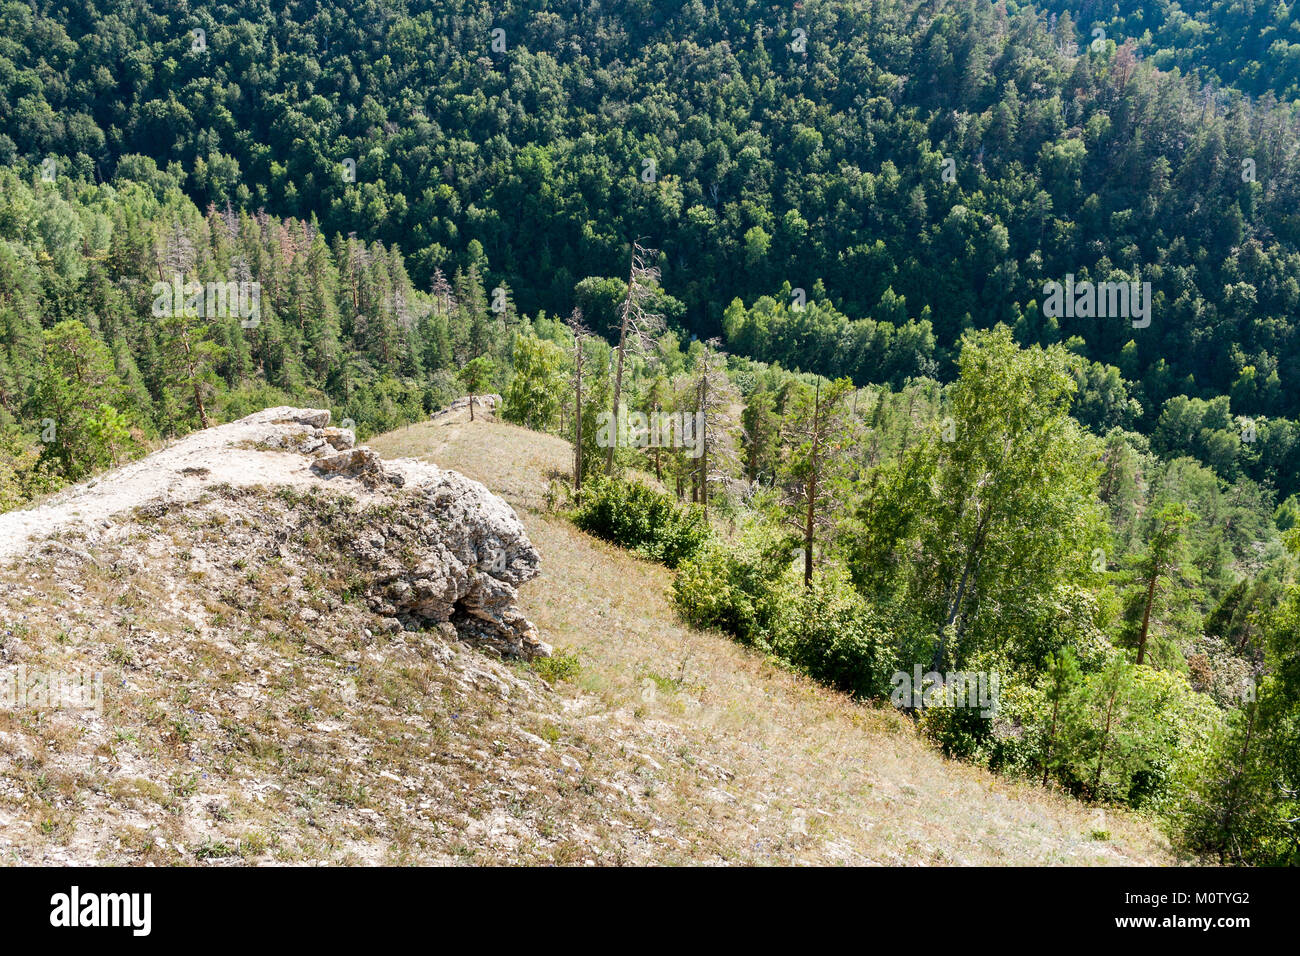 View from top of mountain to dense green forest at its foot. Stock Photo